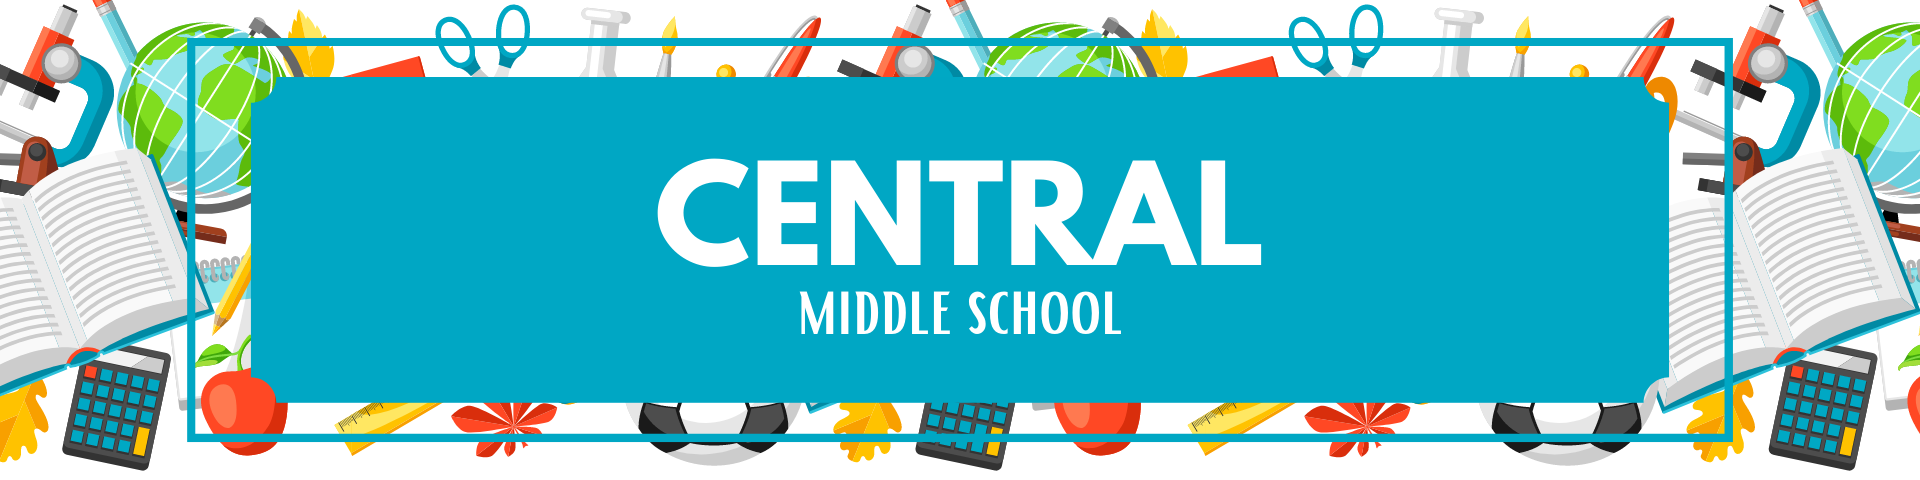 Central Middle